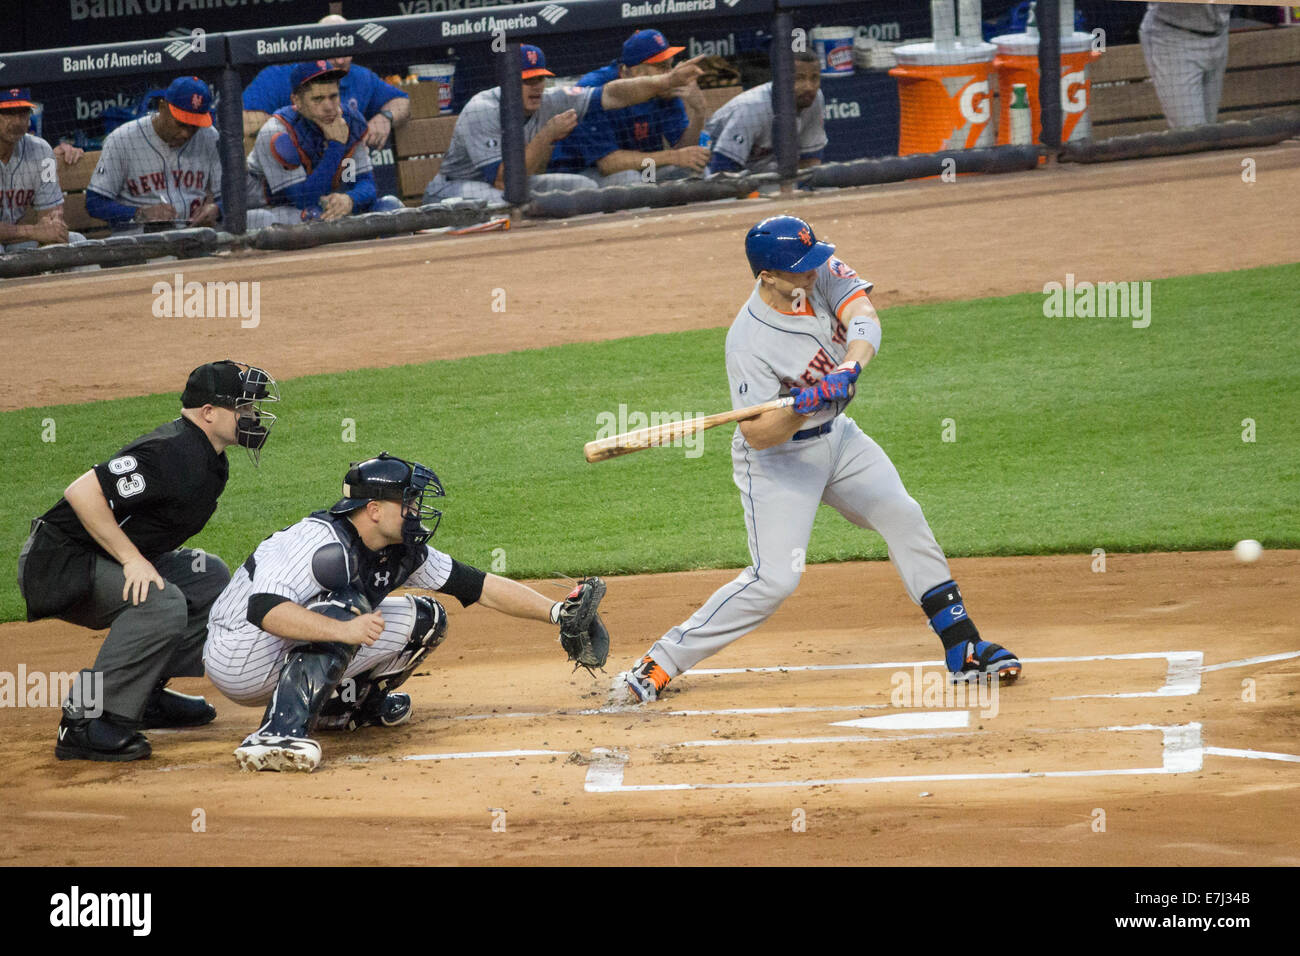 This image shows NY Mets third baseman and superstar David Wright at bat- moments before hitting the ball for an RBI- Stock Photo